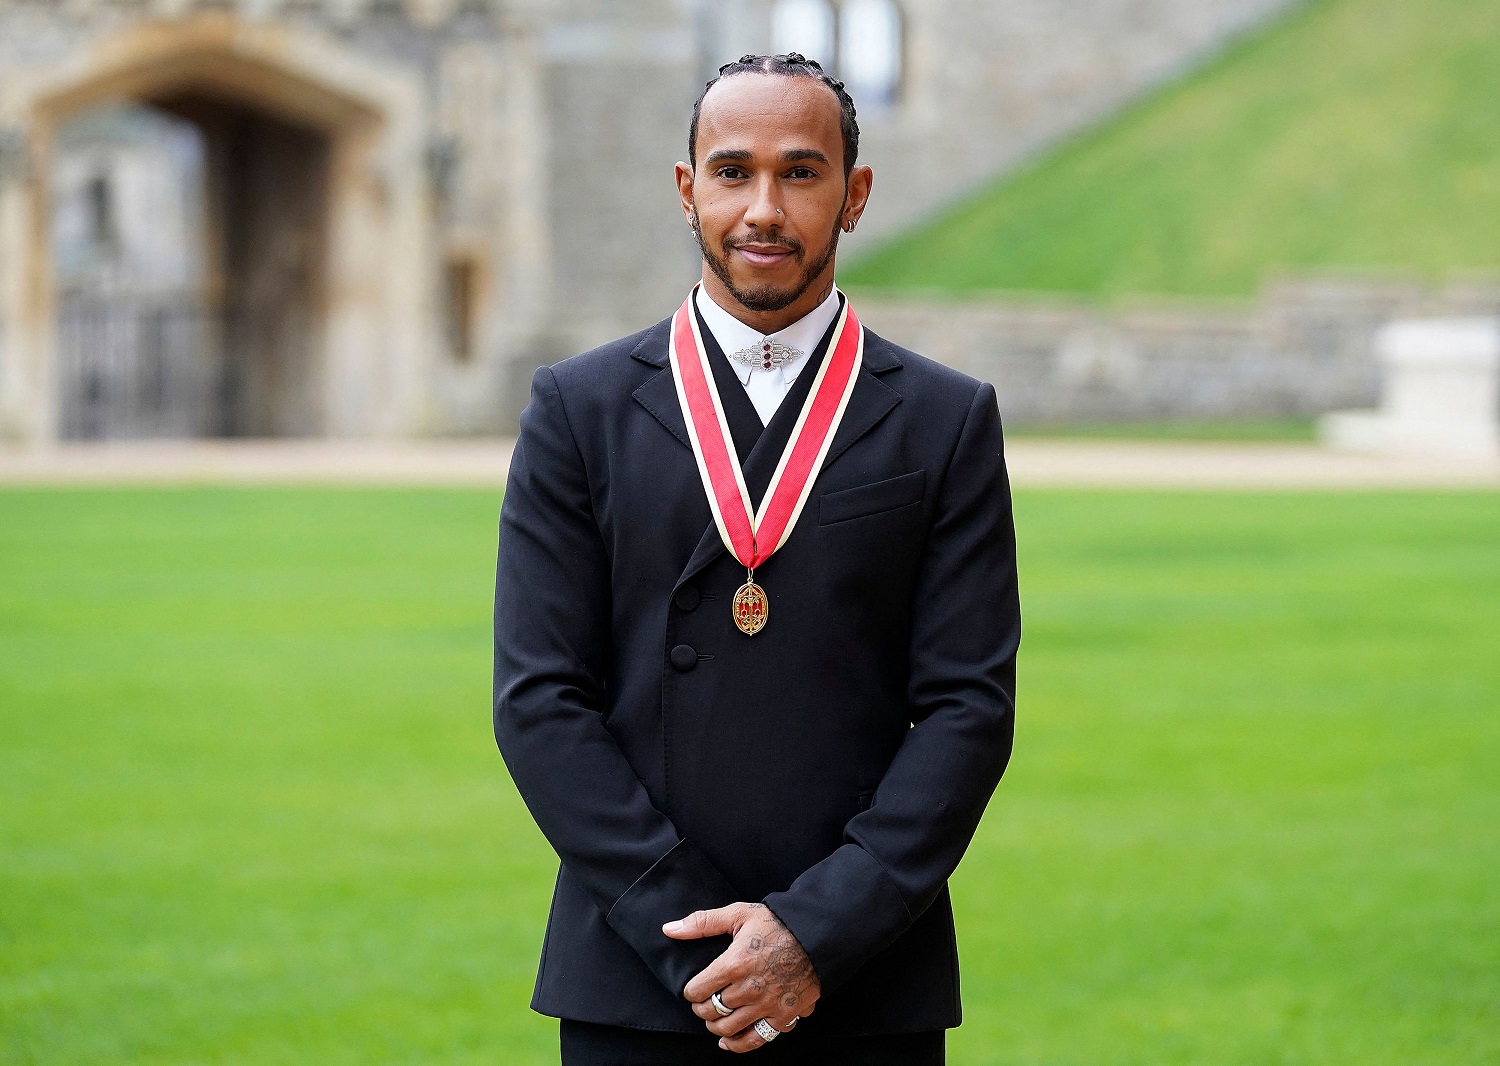 Mercedes' British F1 driver Lewis Hamilton poses with his medal after being appointed as a Knight Bachelor for services to motorsports, by Britain's Prince Charles, Prince of Wales, during an investiture ceremony at Windsor Castle on Dec. 15, 2021.